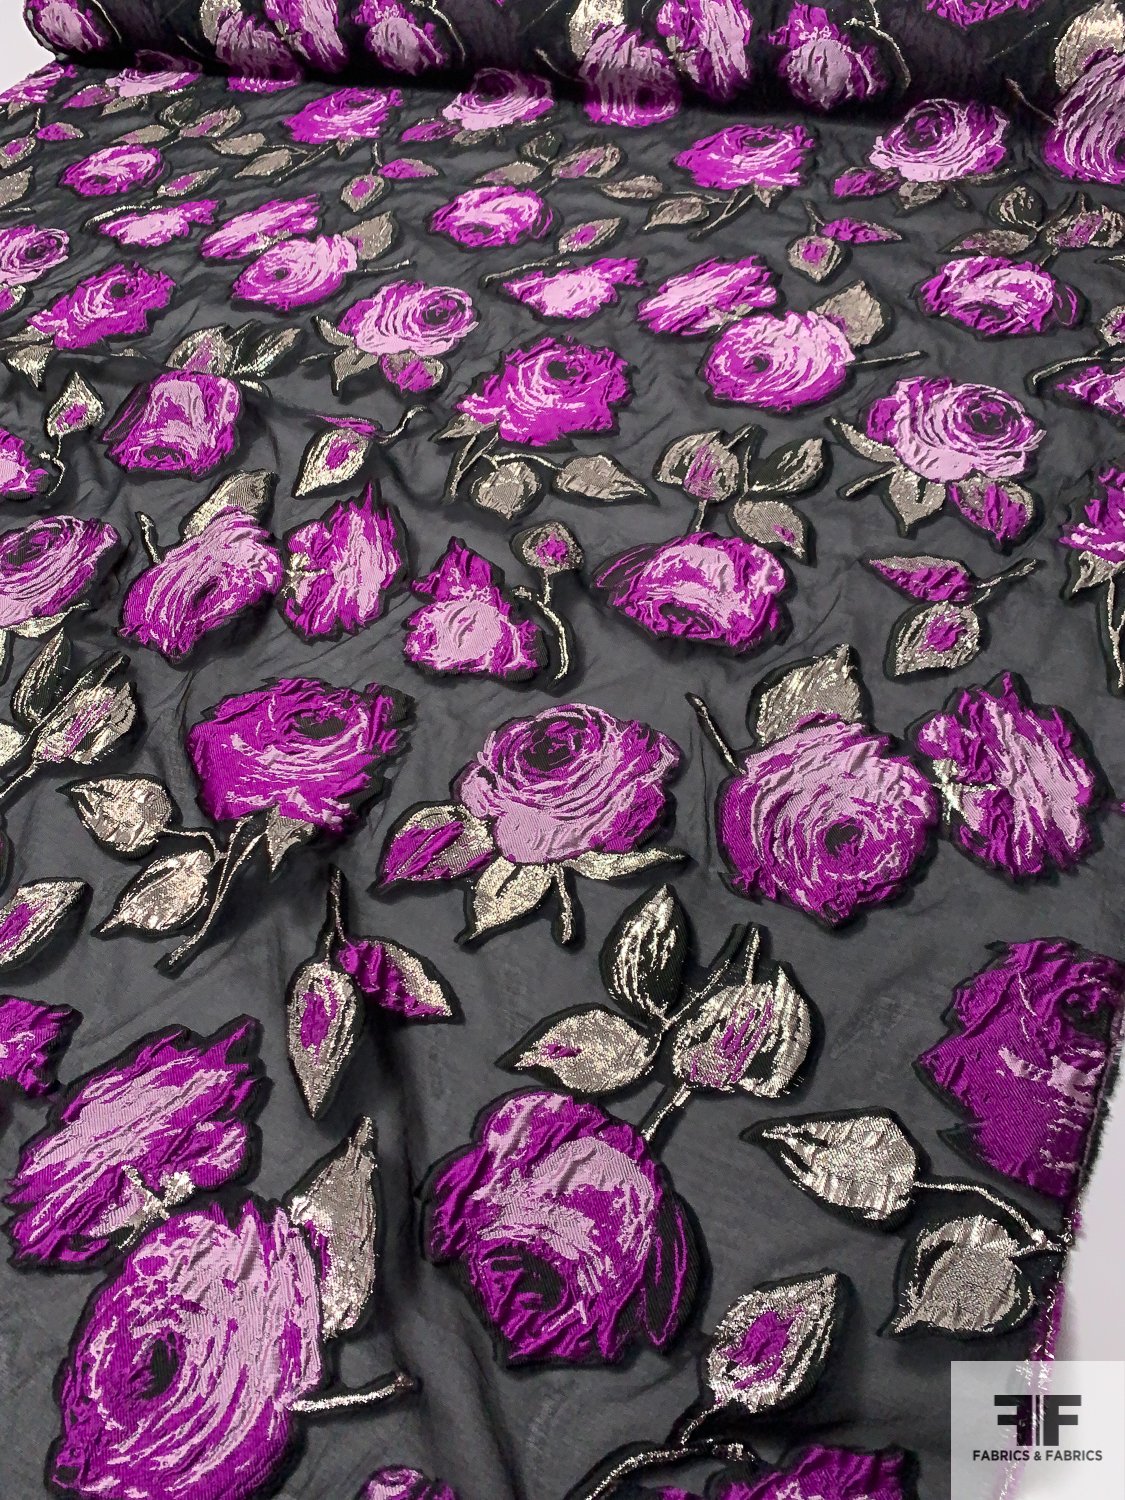 Italian Large Floral Textured Fil Coupé with Lurex on Organza - Magenta / Lavender / Black / Silver